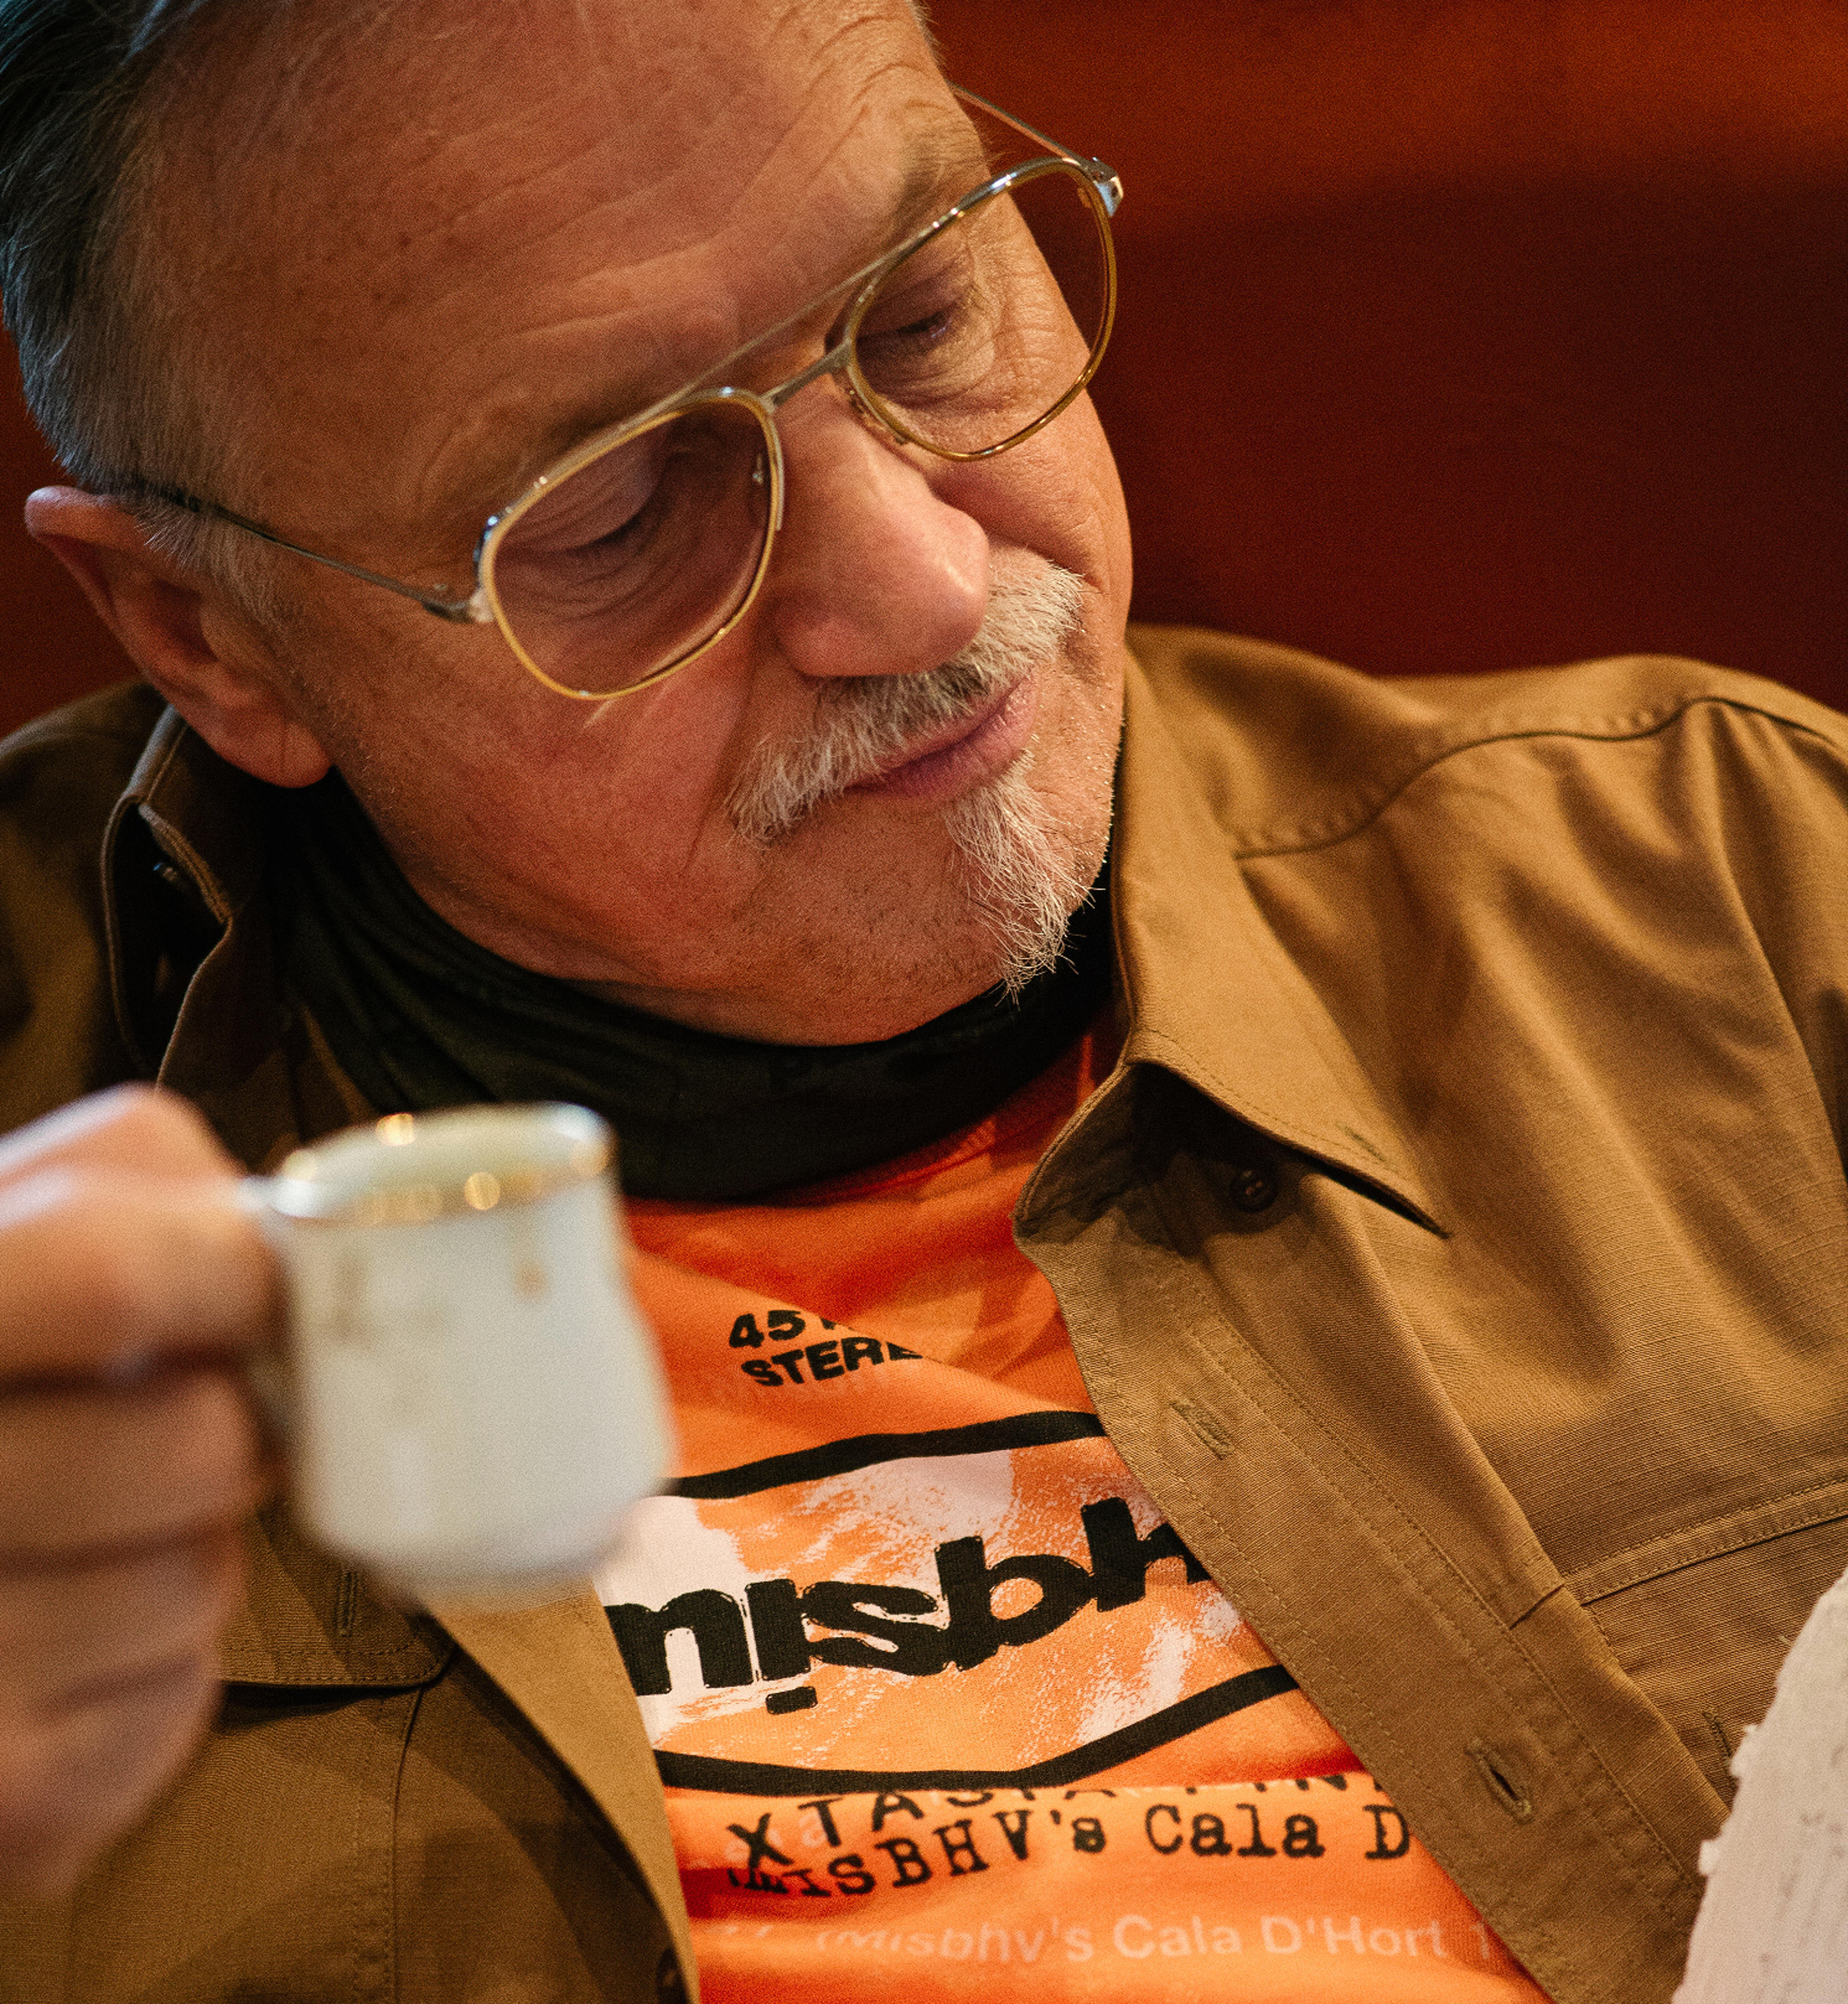 Janis Zuzans is reading a book, wearing glasses, an orange shirt and an ocher shirt, holding a small white coffee mug.